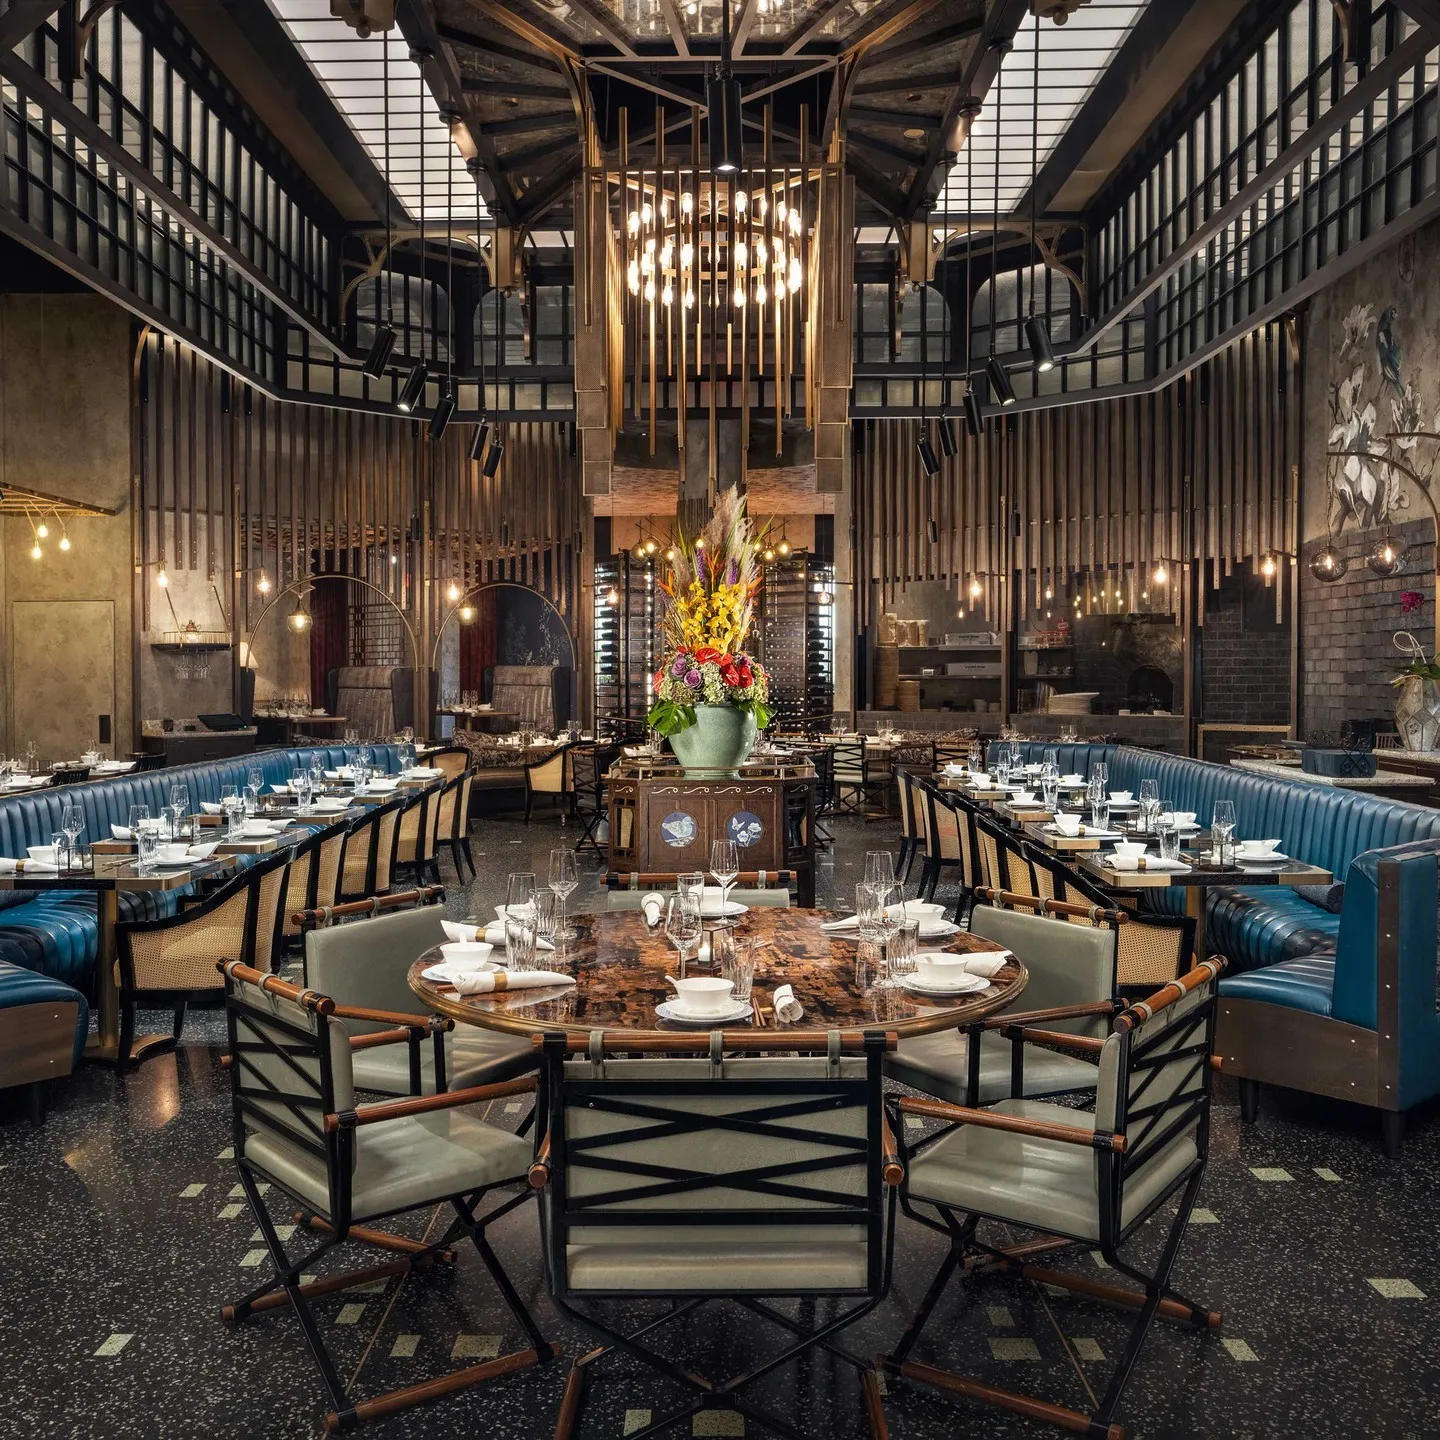 The Palazzo Las Vegas - It's always a good time for dim sum at #mott32vegas